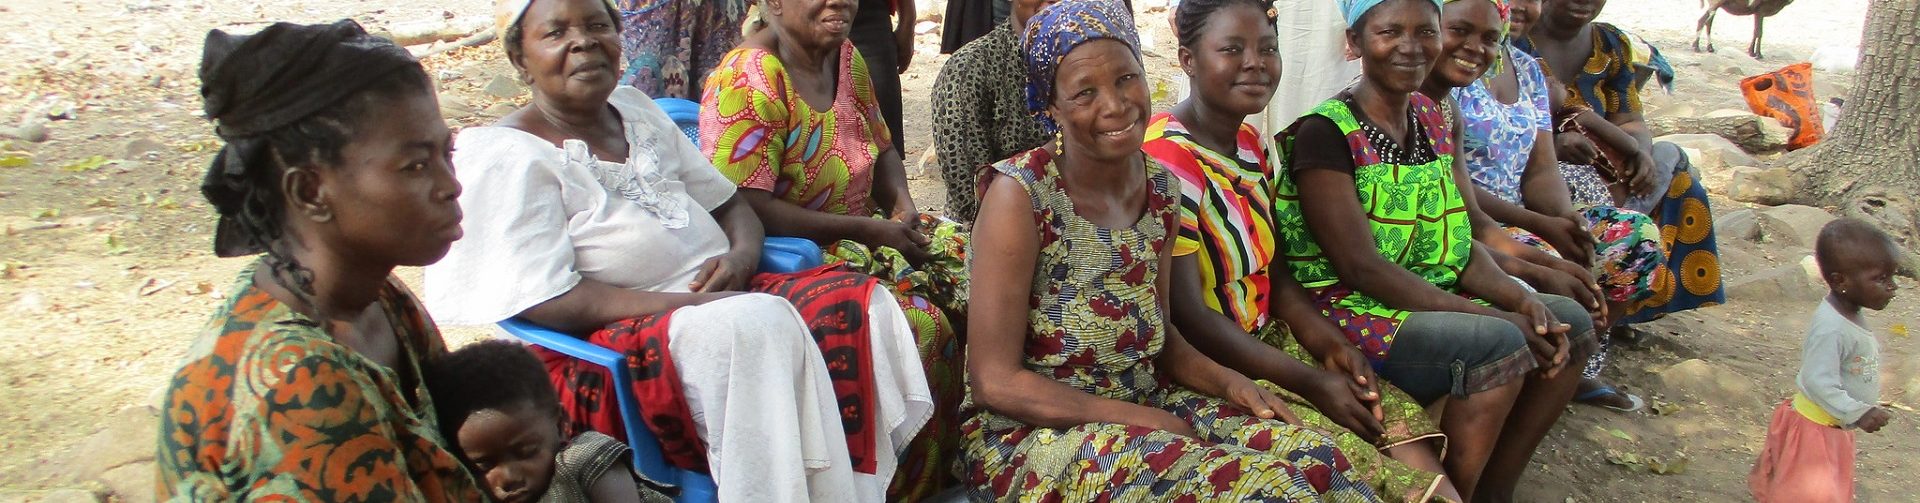 Women’s access to land in Ghana: Are we asking the right questions, drawing the right conclusions?